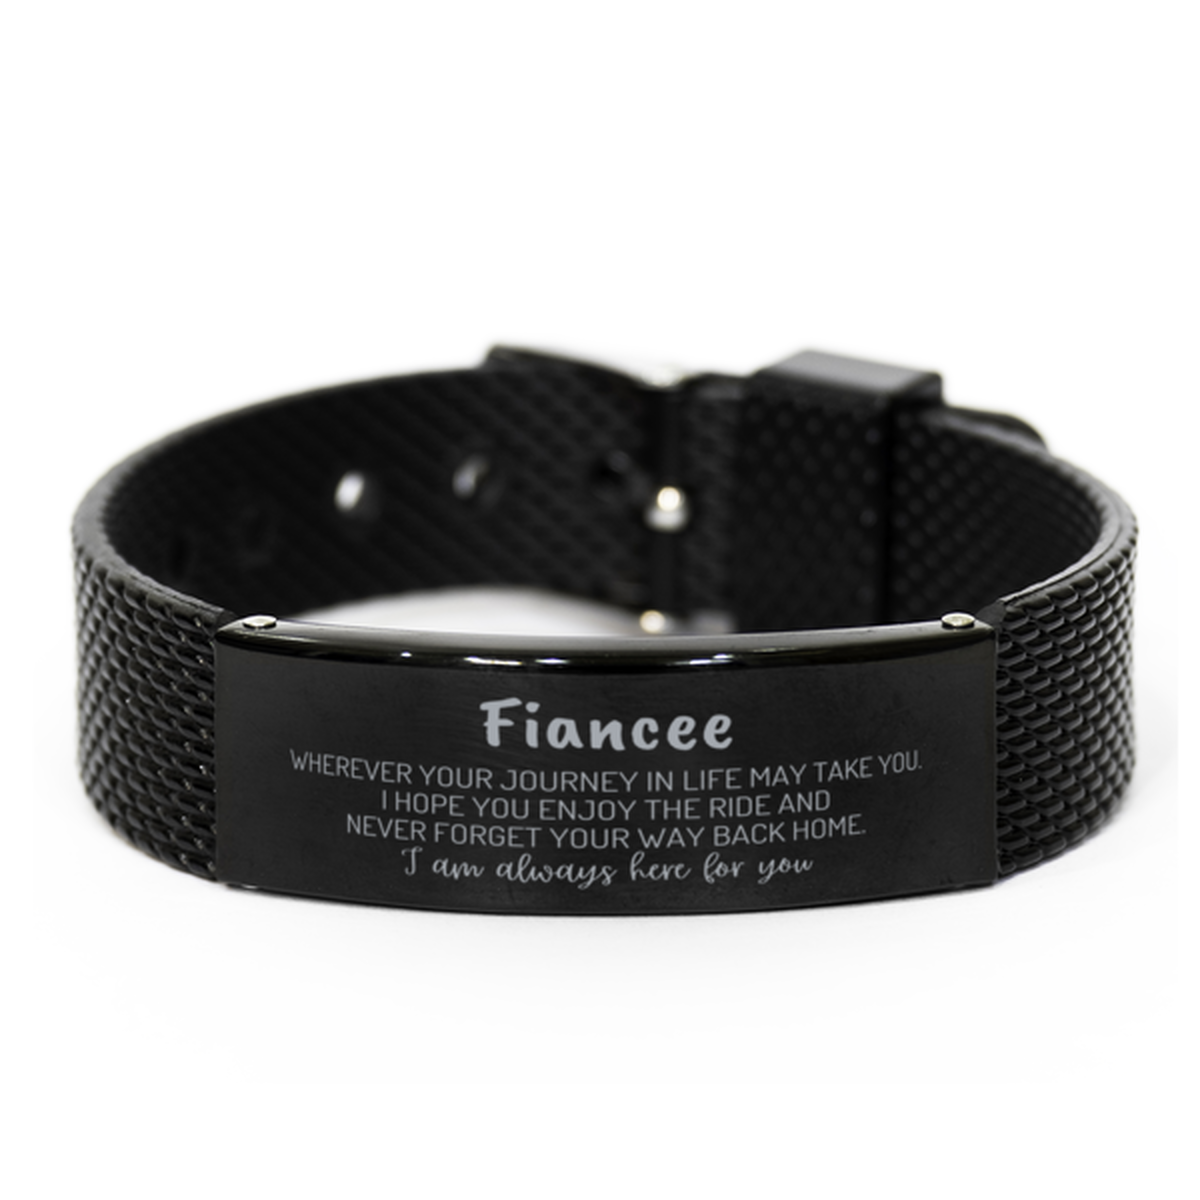 Fiancee wherever your journey in life may take you, I am always here for you Fiancee Black Shark Mesh Bracelet, Awesome Christmas Gifts For Fiancee, Fiancee Birthday Gifts for Men Women Family Loved One